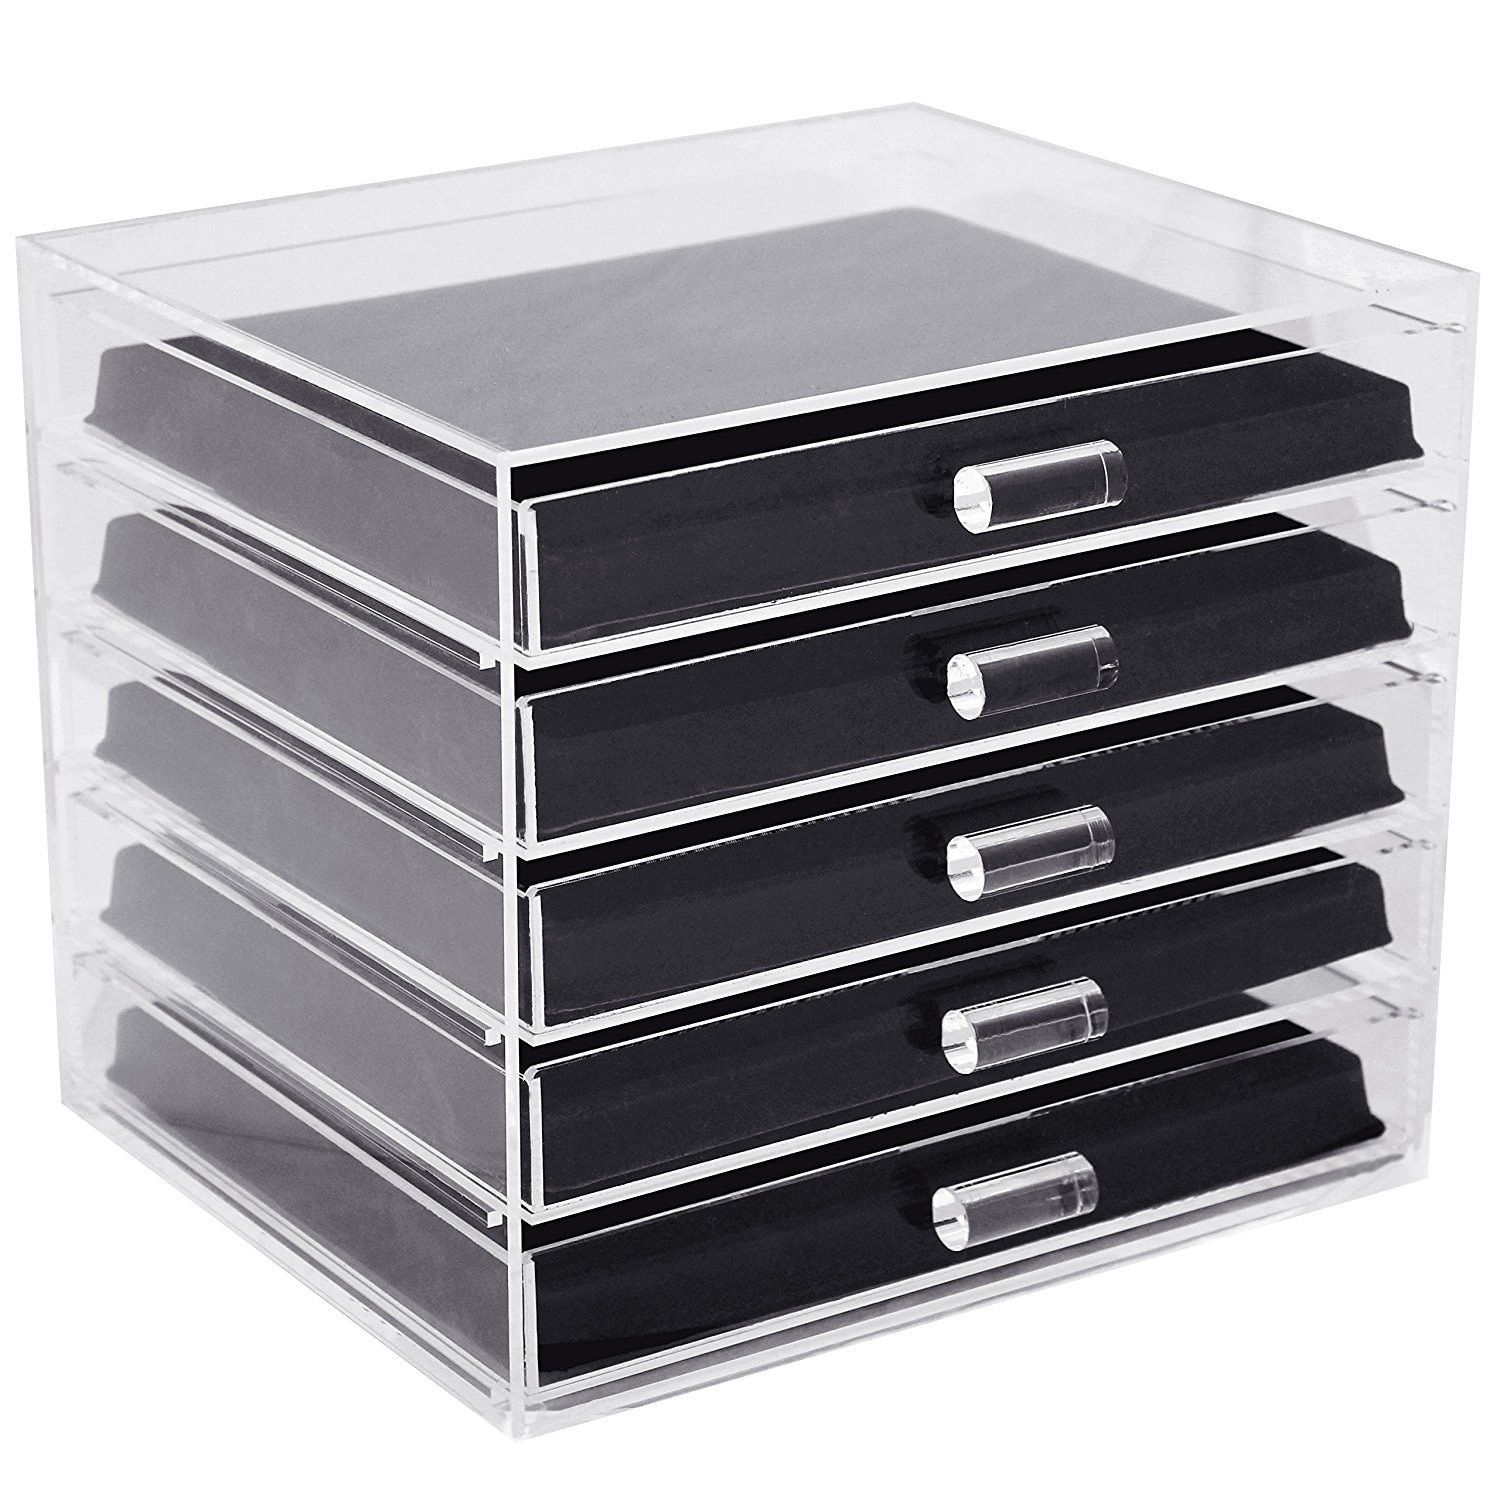 Acrylic 5-Tier Jewelry Organizer with 5- and 16-compartment Flocked Display Inserts